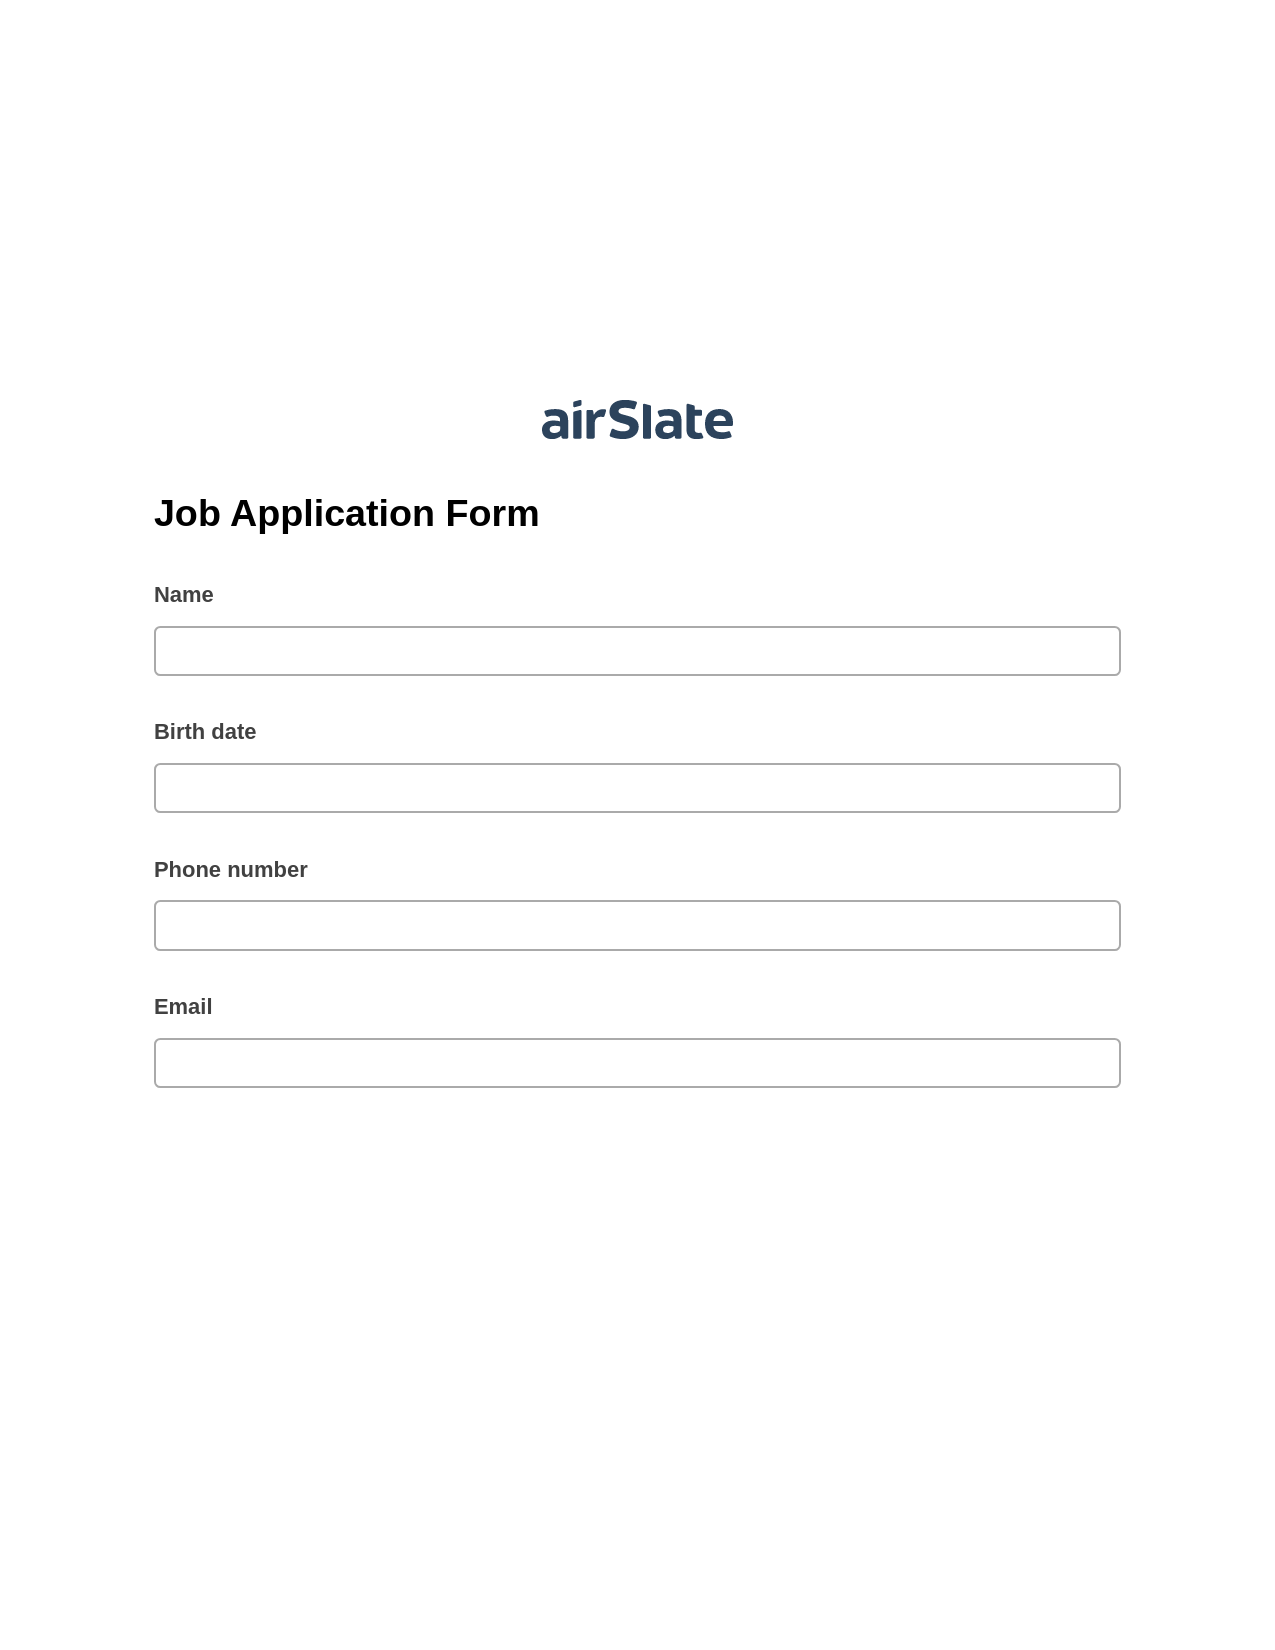 Job Application Form Pre-fill from Google Sheets Bot, Document Hide Bot, Export to Formstack Documents Bot